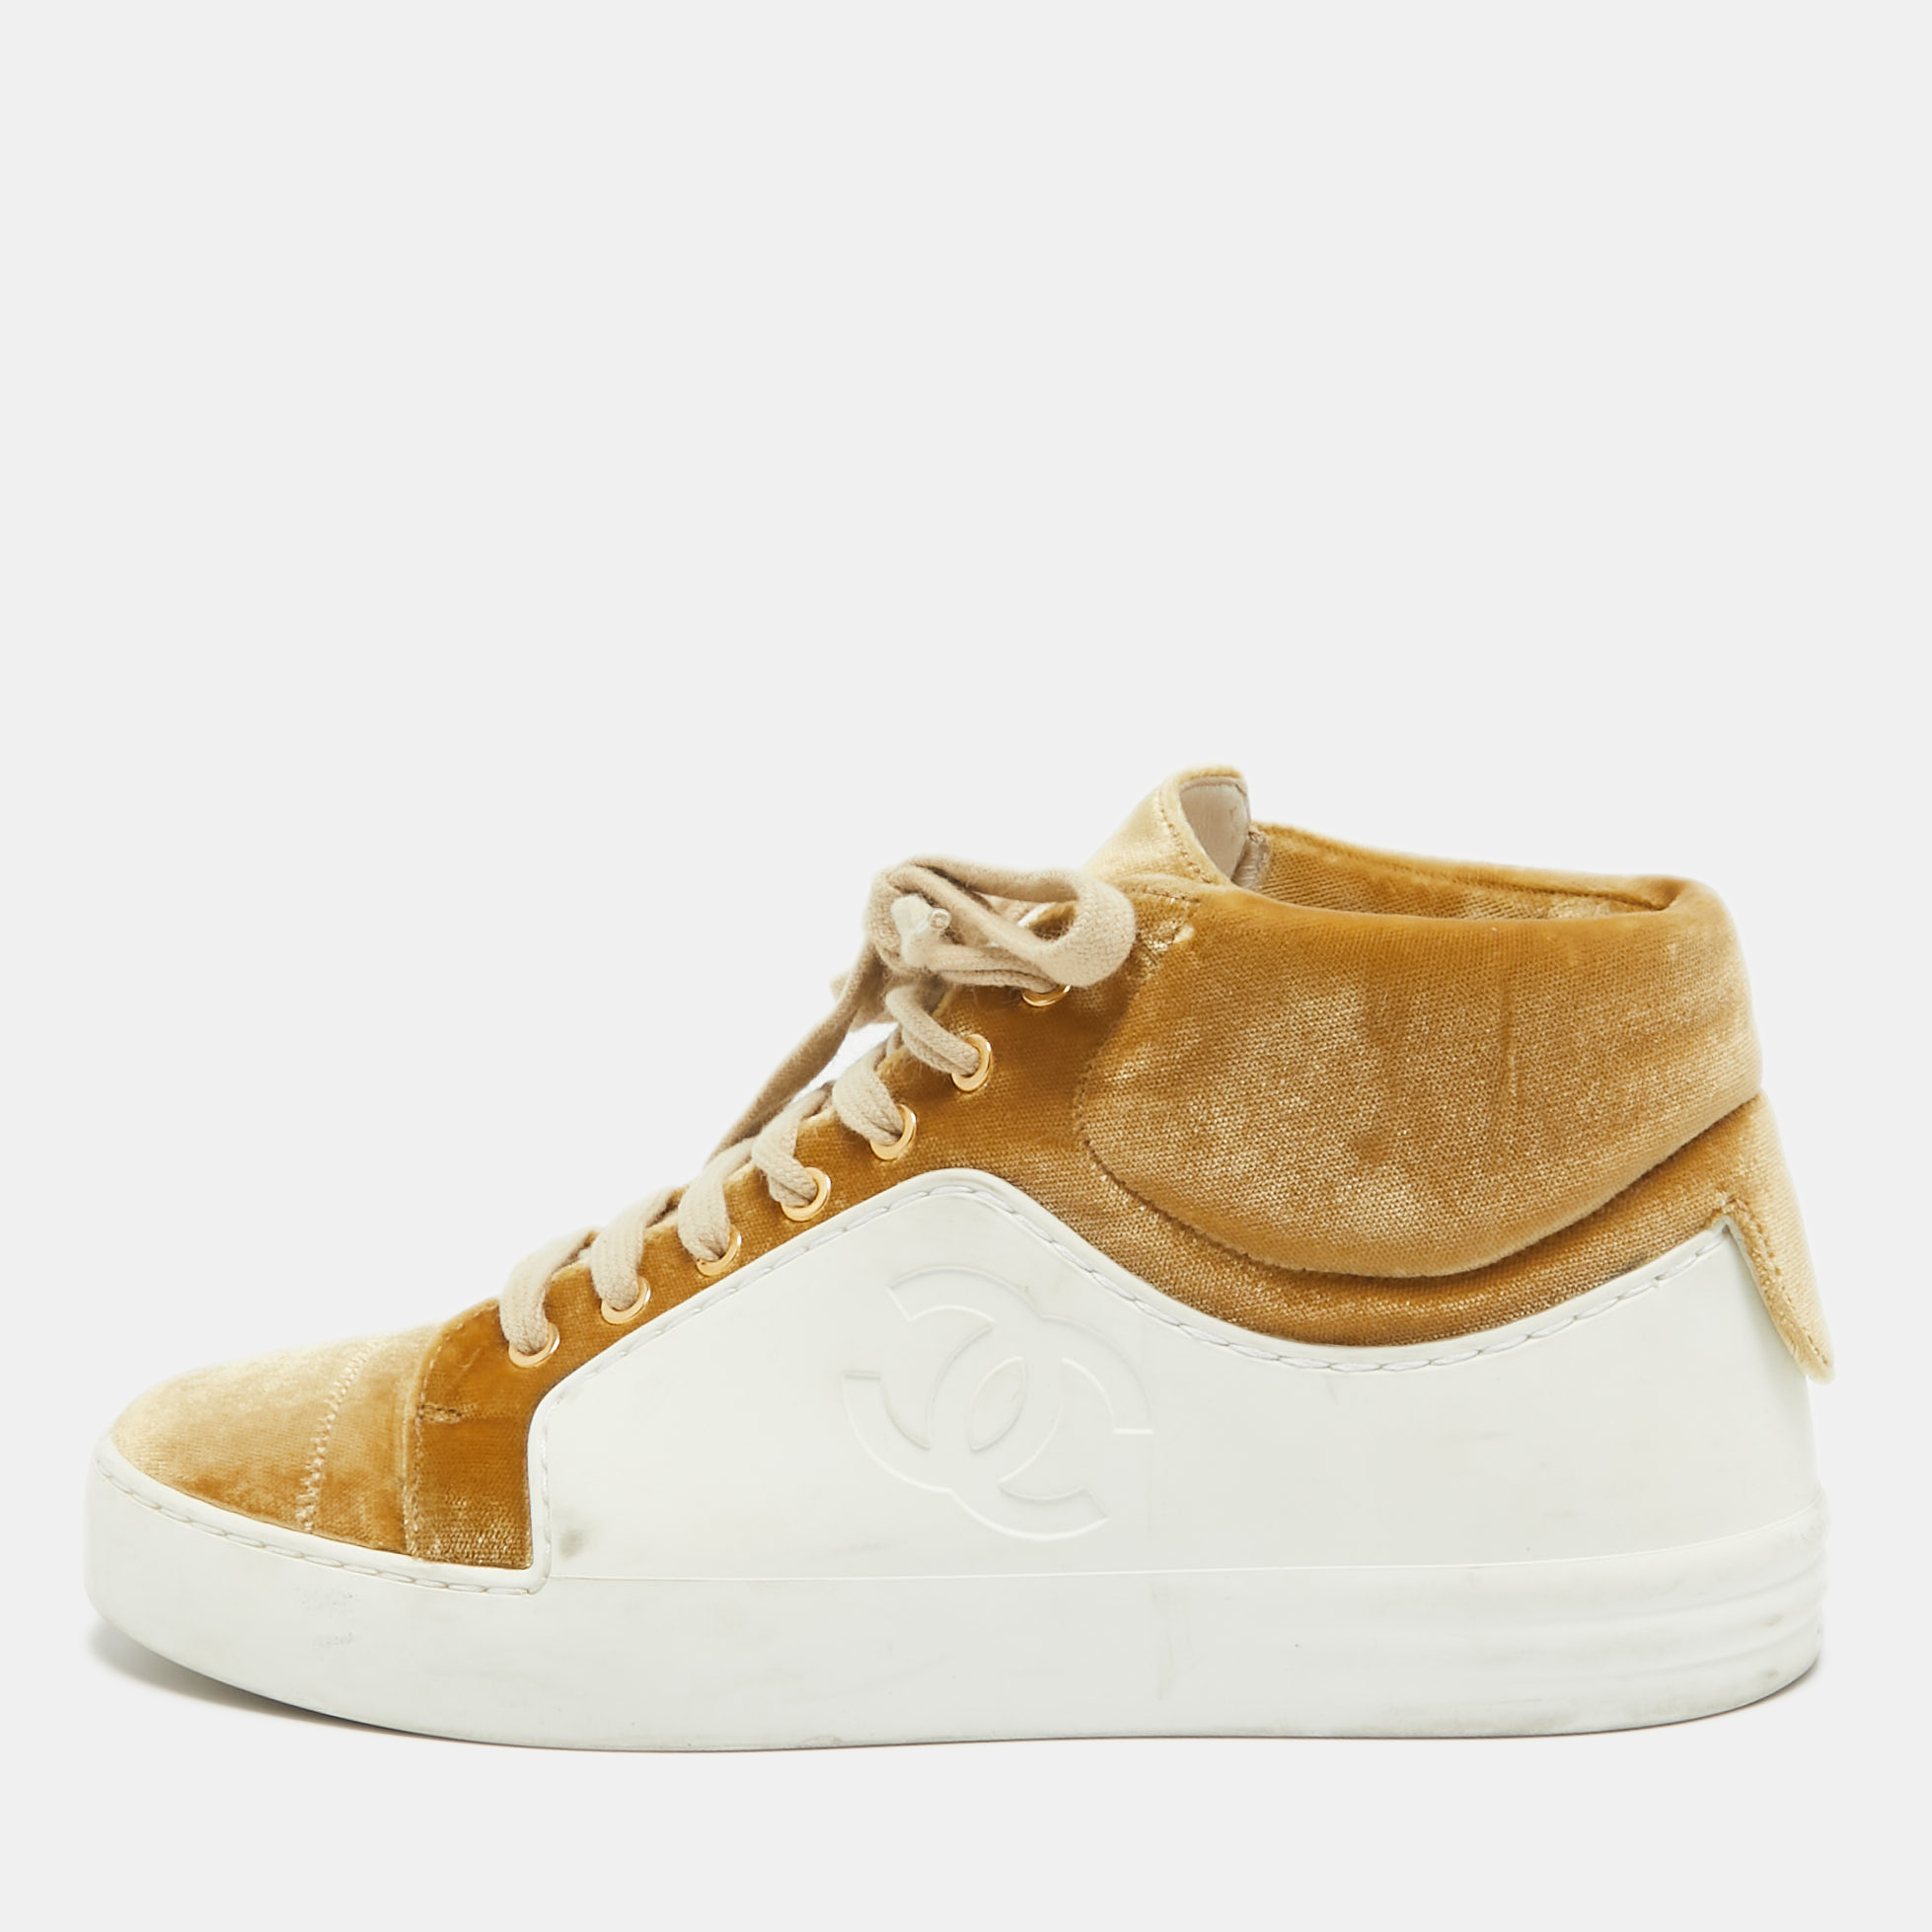 Chanel gold/white velvet and rubber cc high top sneakers size 36